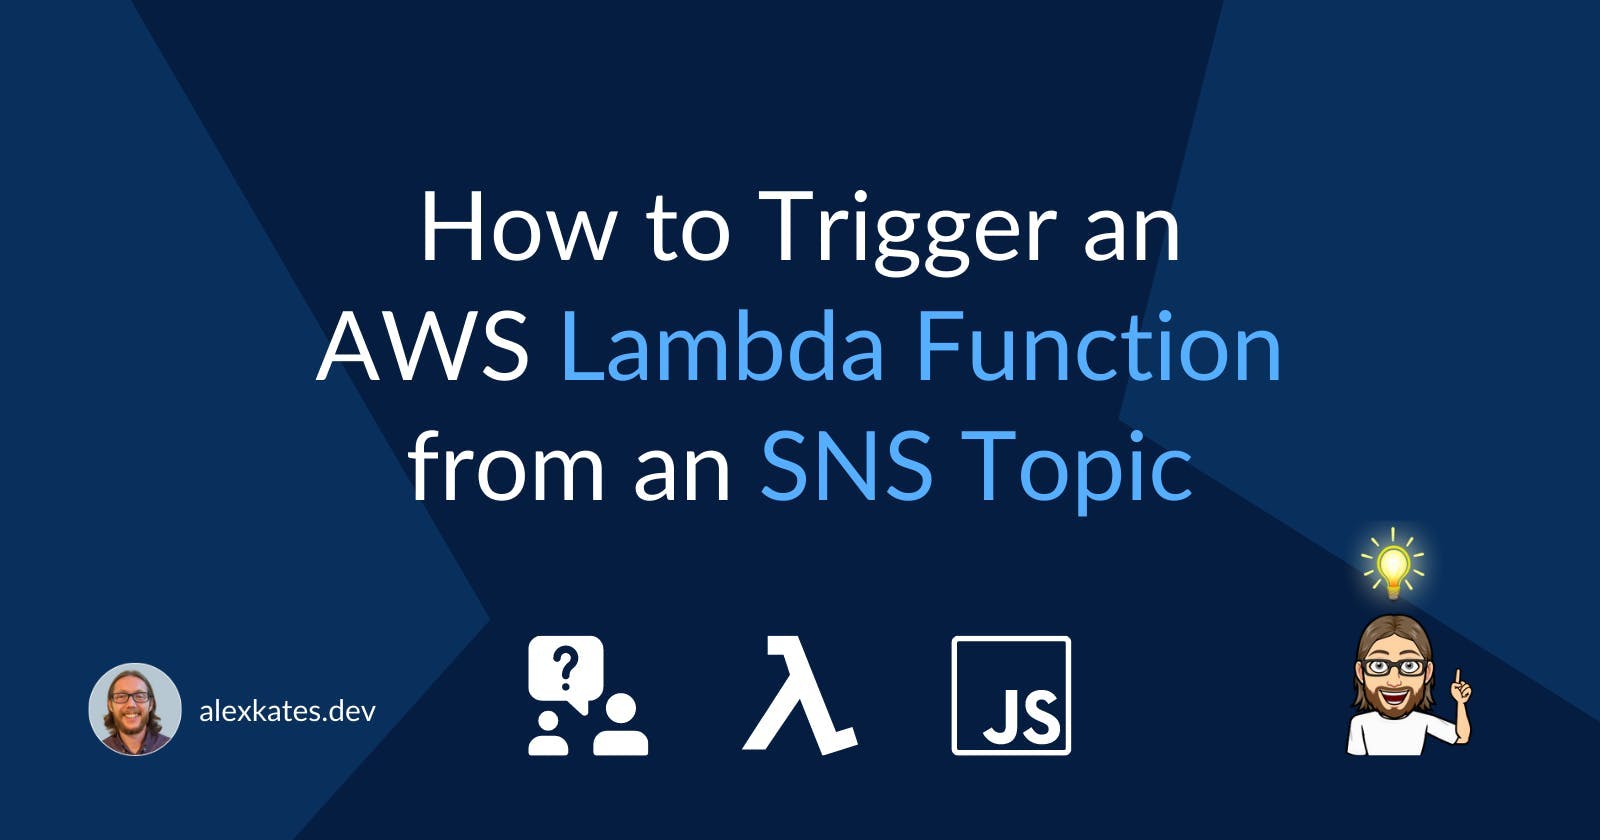 How to Trigger an AWS Lambda Function from an SNS Message